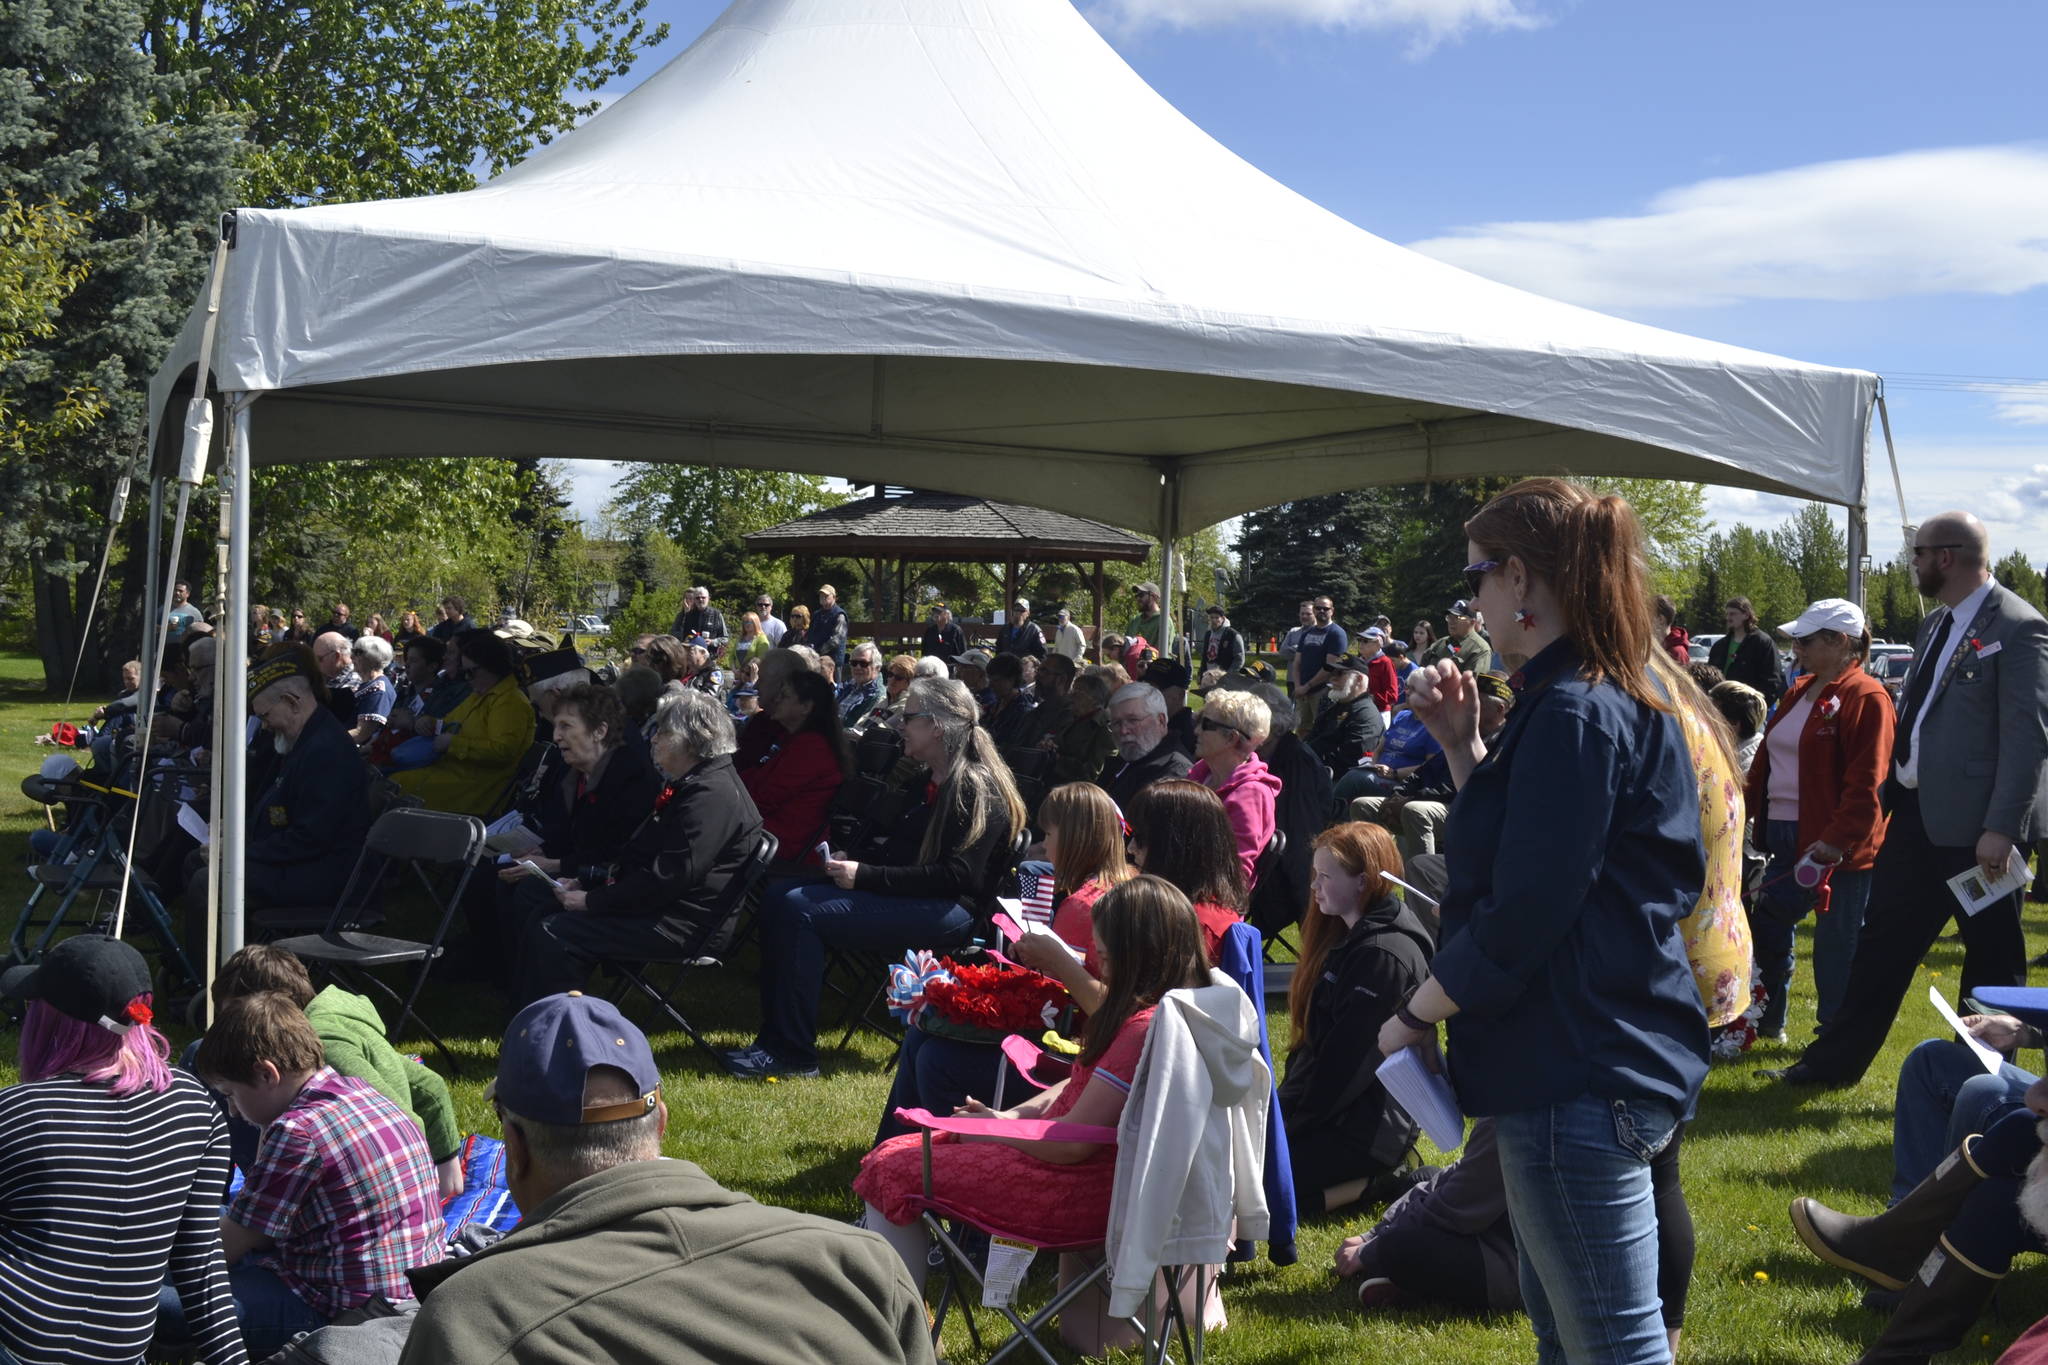 Dozens of residents and veterans gathered to celebrate Memorial Day at Kenai’s Memorial Day ceremony on Monday, May 27, 2019, in Leif Hansen Memorial Park in Kenai, Alaska. (Photo by Victoria Petersen/Peninsula Clarion)                                Dozens of residents and veterans gathered to celebrate Memorial Day at Kenai’s Memorial Day ceremony on Monday, May 27, 2019, in Leif Hansen Memorial Park in Kenai, Alaska. (Photo by Victoria Petersen/Peninsula Clarion)